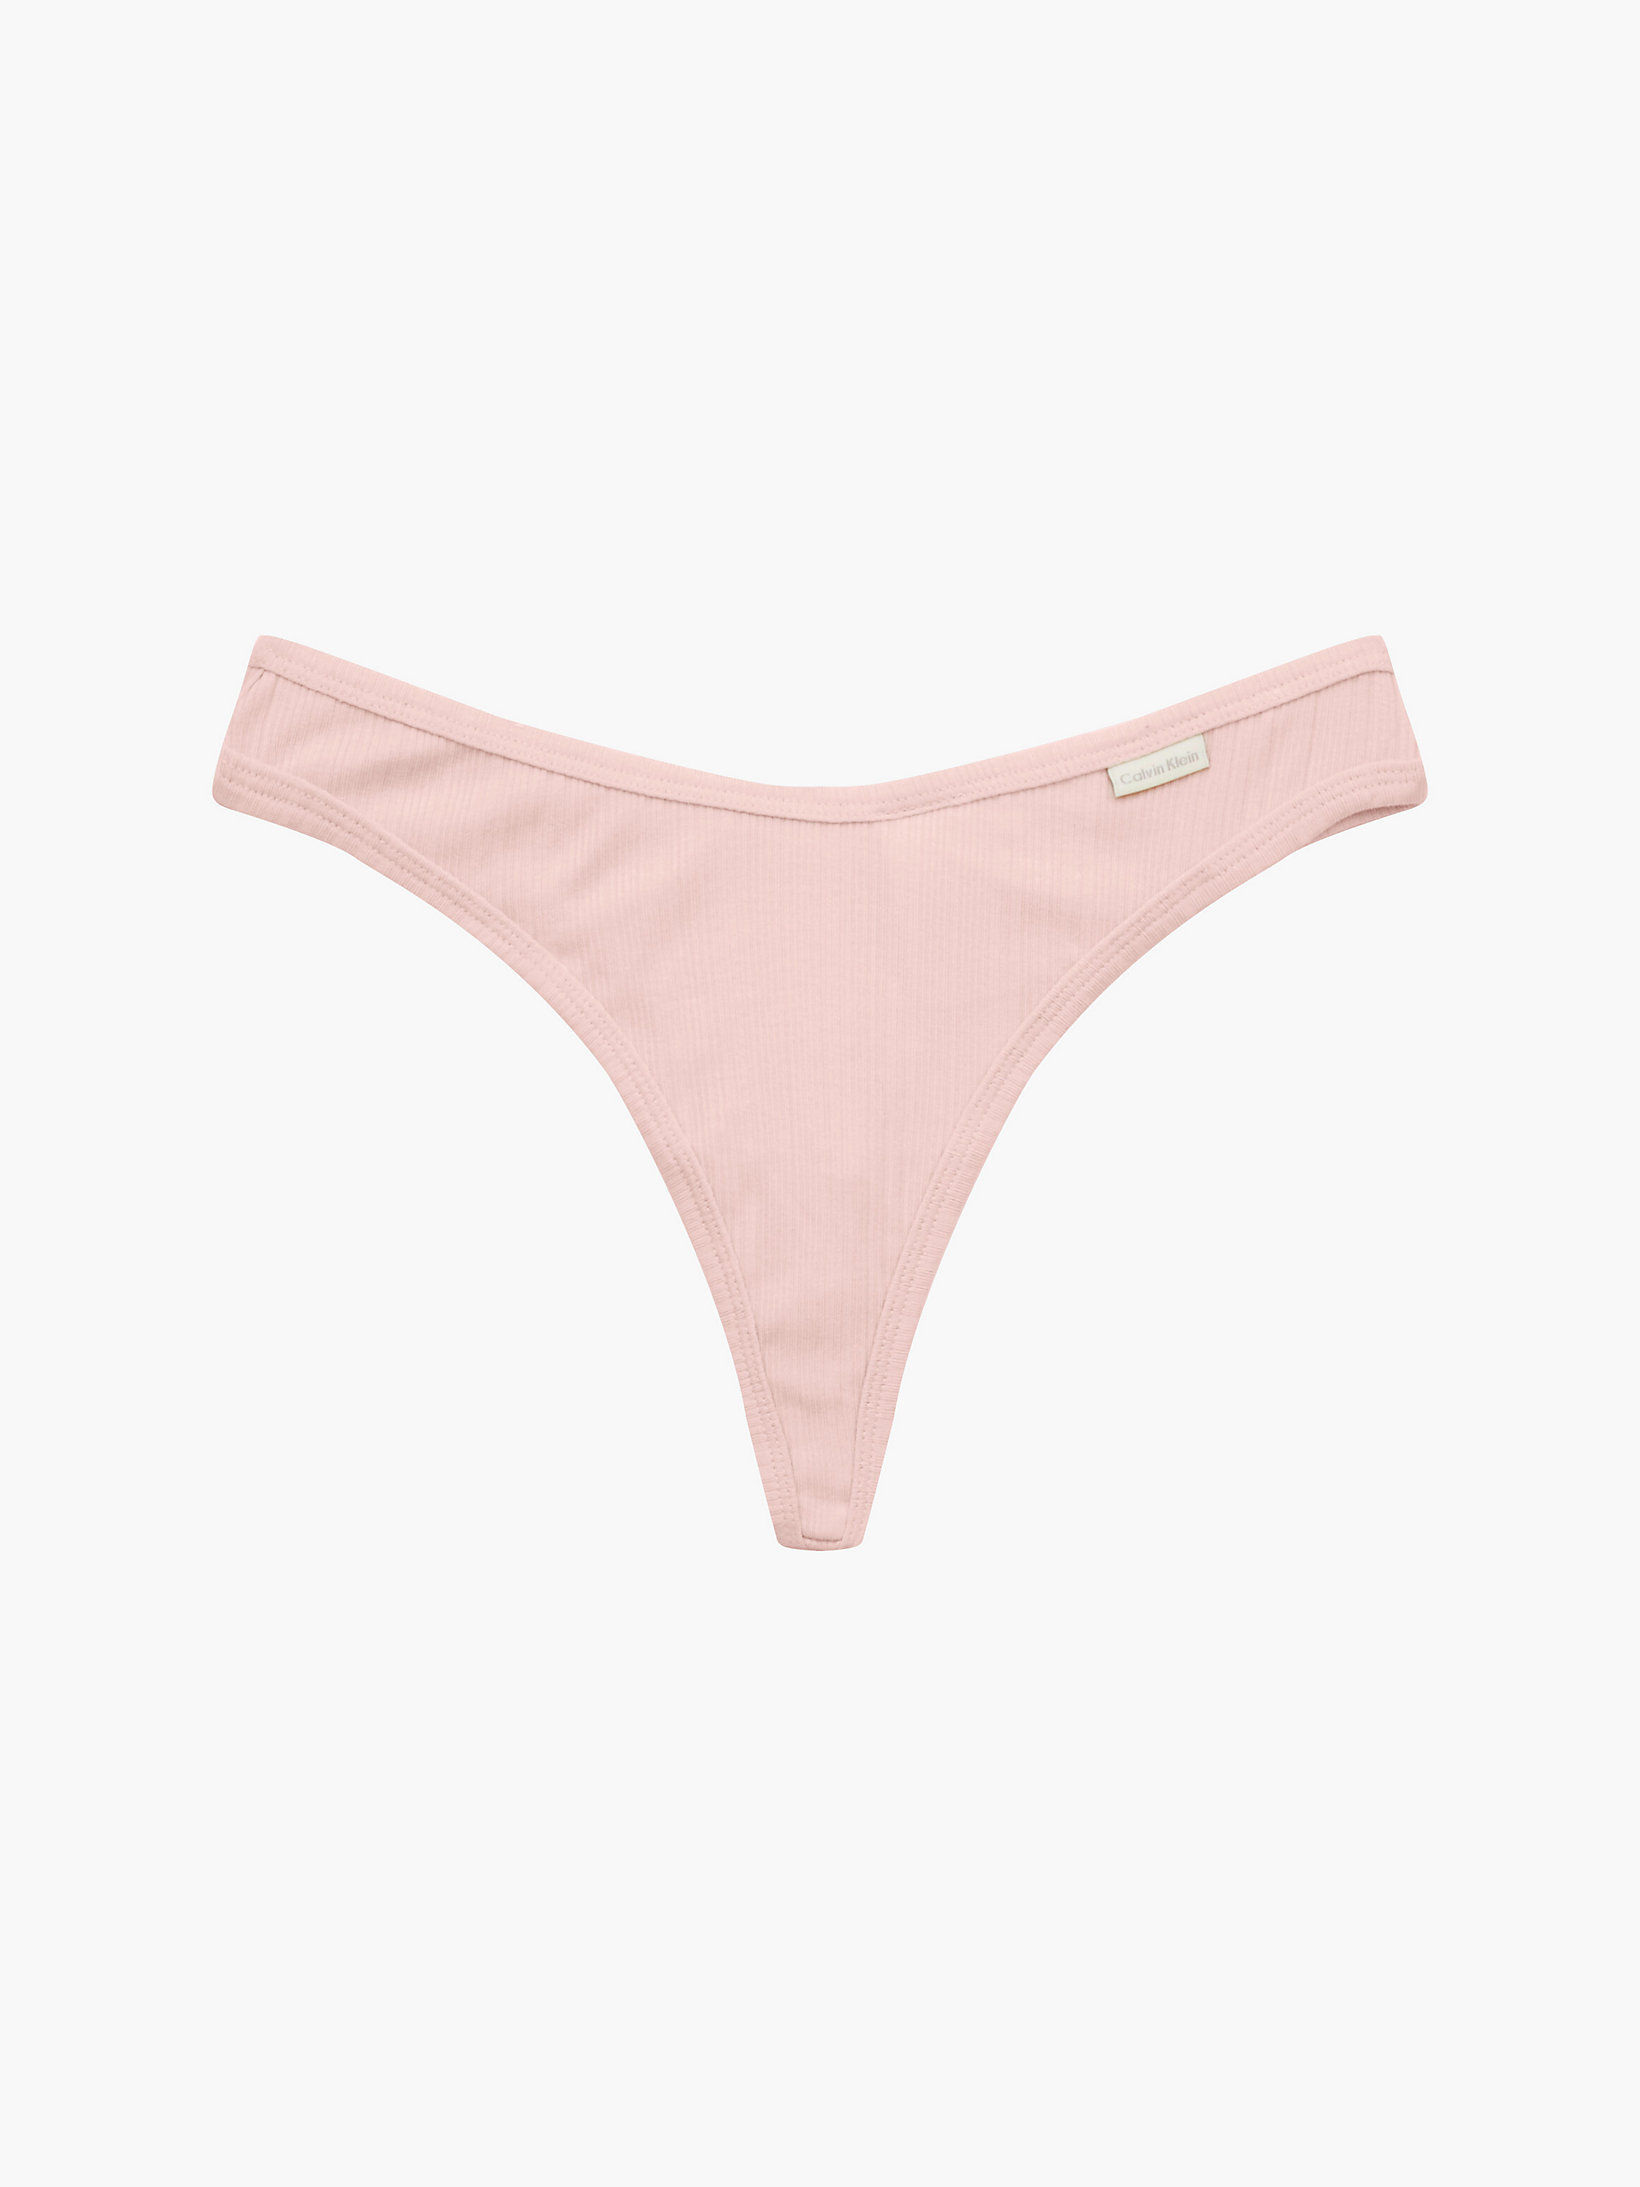 Perizoma - Pure Ribbed > Barely Pink > undefined donna > Calvin Klein